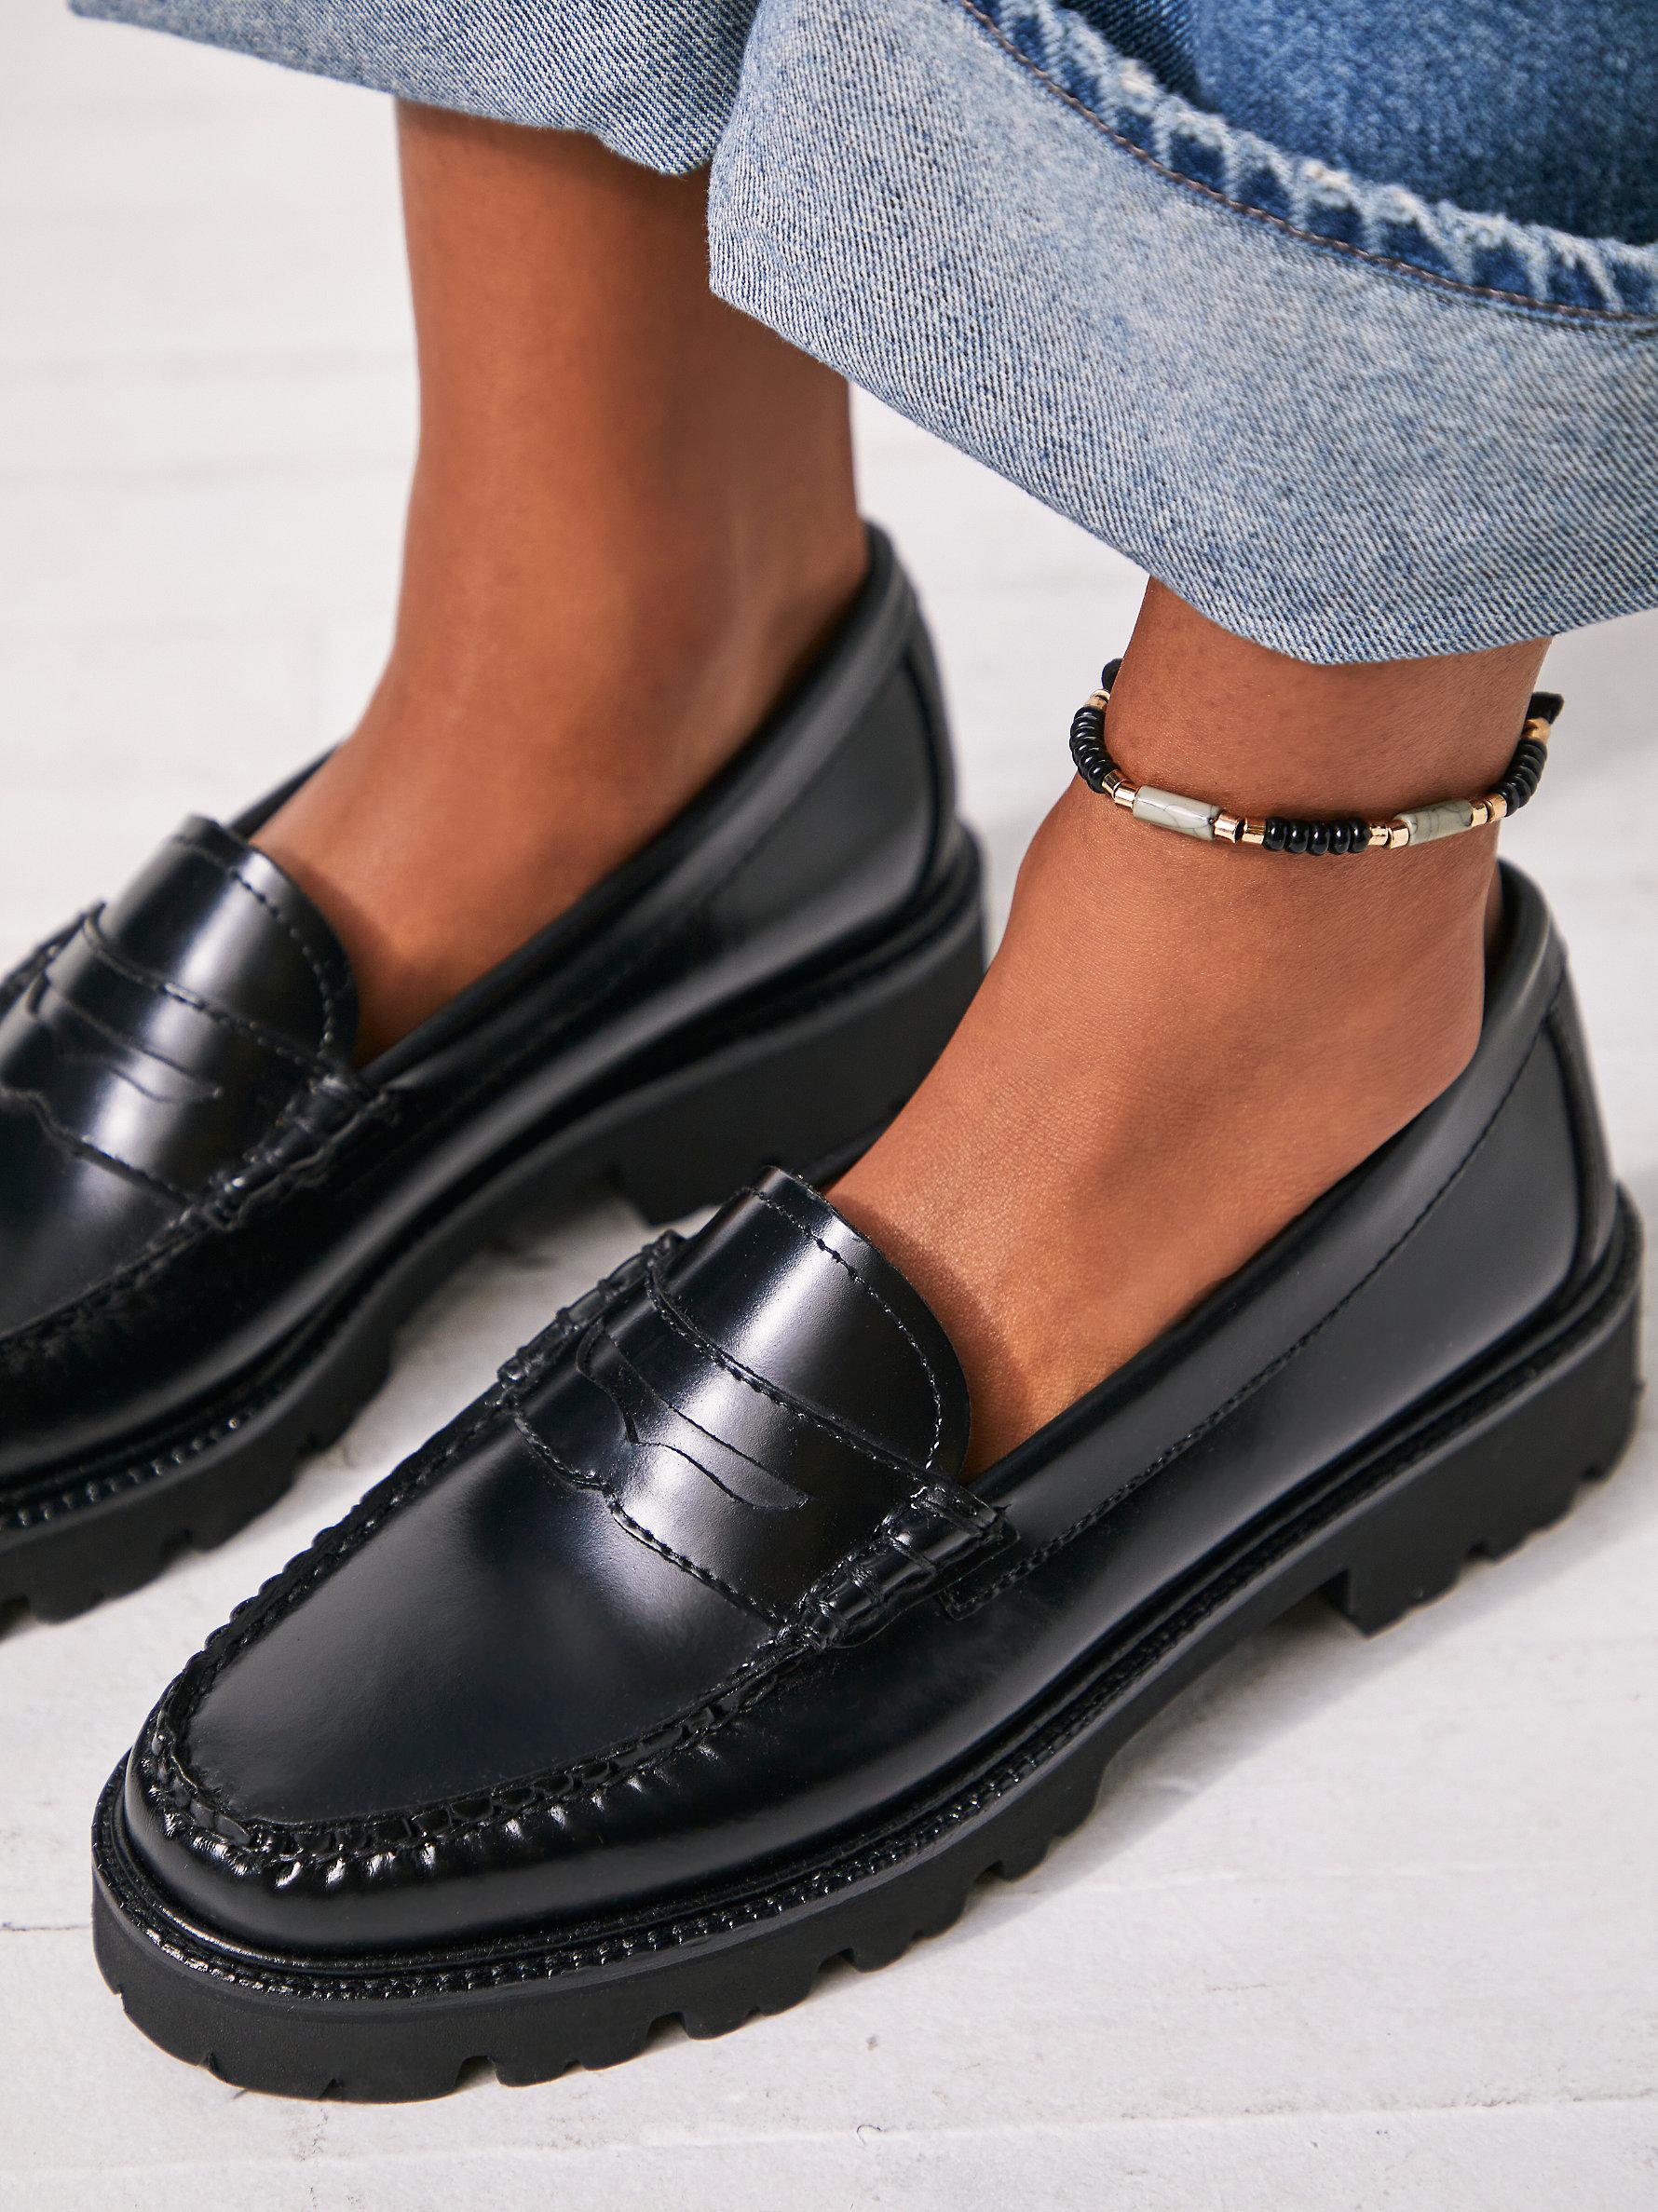 Free People G.h. Bass Whitney Super Lug Loafers in Black | Lyst